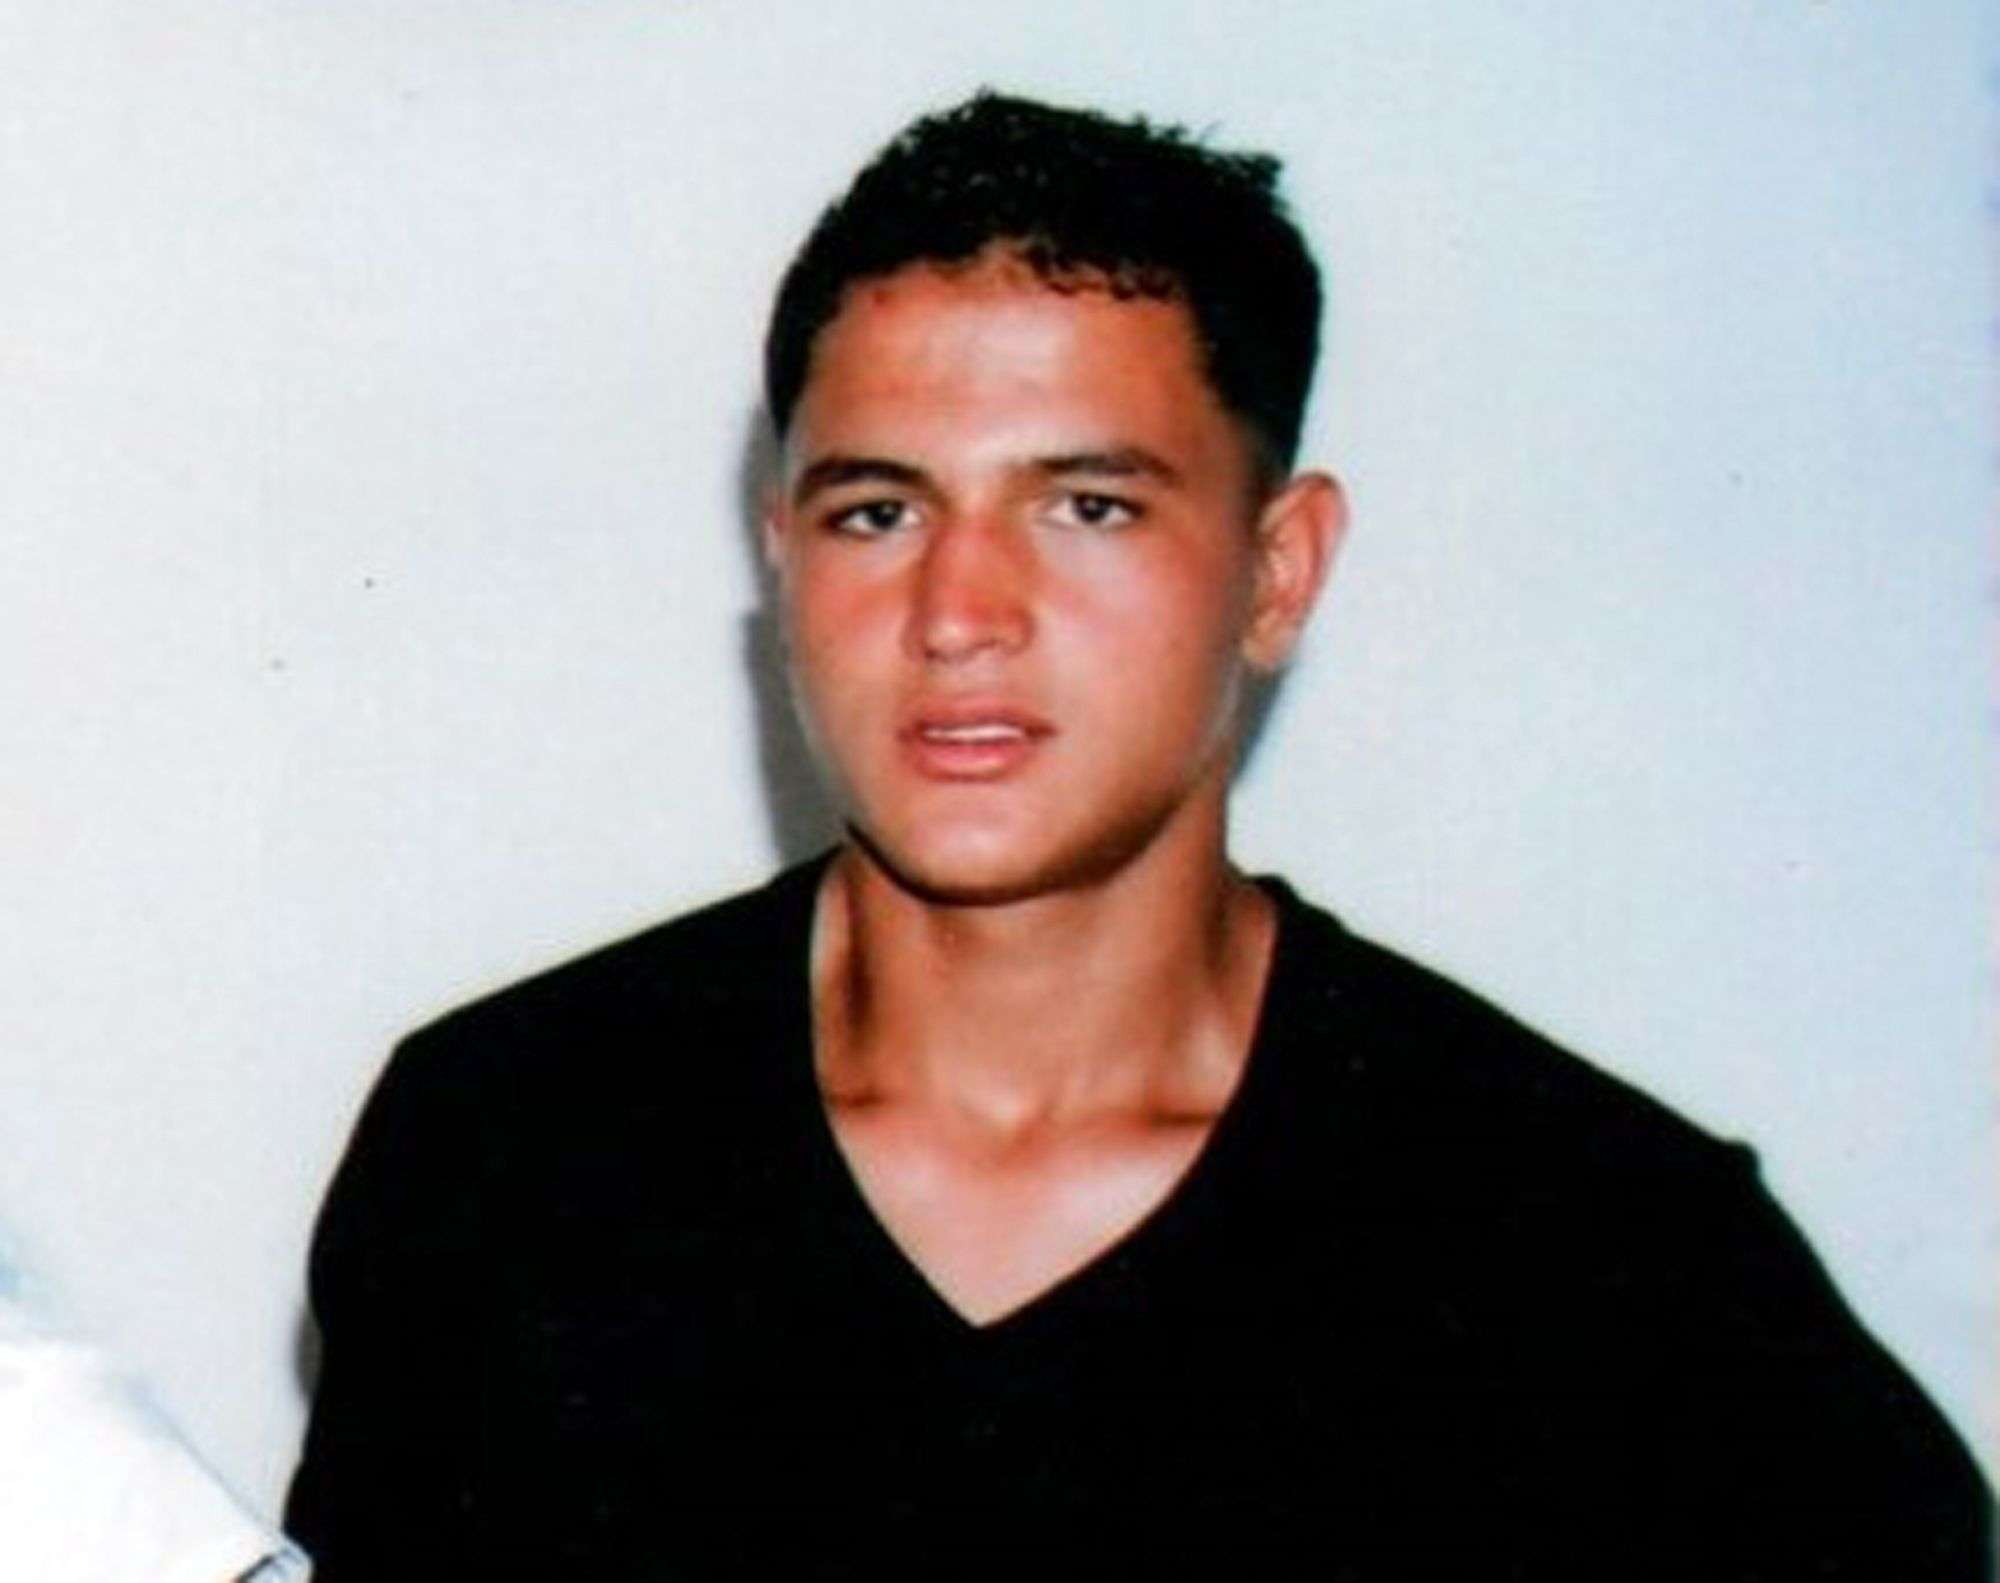 This undated picture provided by Najoua Amri on Thursday, Dec. 22, 2016, shows the fugitive Tunisian suspected in Berlin's deadly Christmas market attack, Anis Amri, posing at his parents' house in Oueslatia, central Tunisia. German authorities issued a wanted notice for Anis Amri on Wednesday and offered a reward of up to 100,000 euros ($104,000) for information leading to the 24-year-old's arrest, warning that he could be "violent and armed." (Courtesy Najoua Amri to AP)